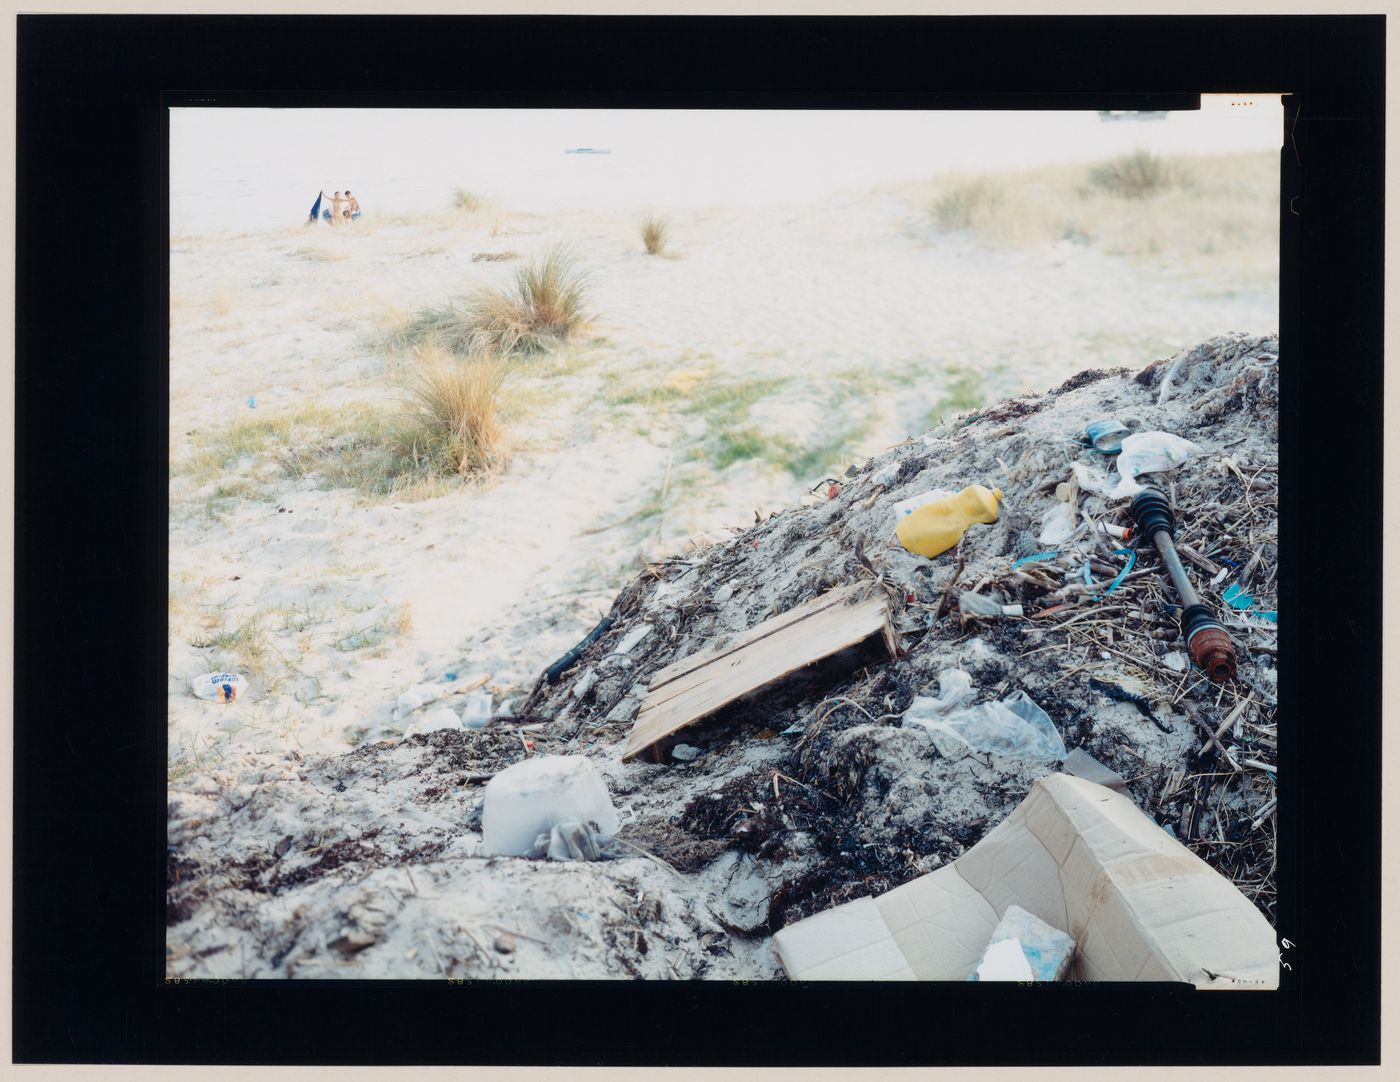 View of a pile of rubbish and a beach showing a family in the background, Cape Finisterre, Spain (from the series "In between cities")